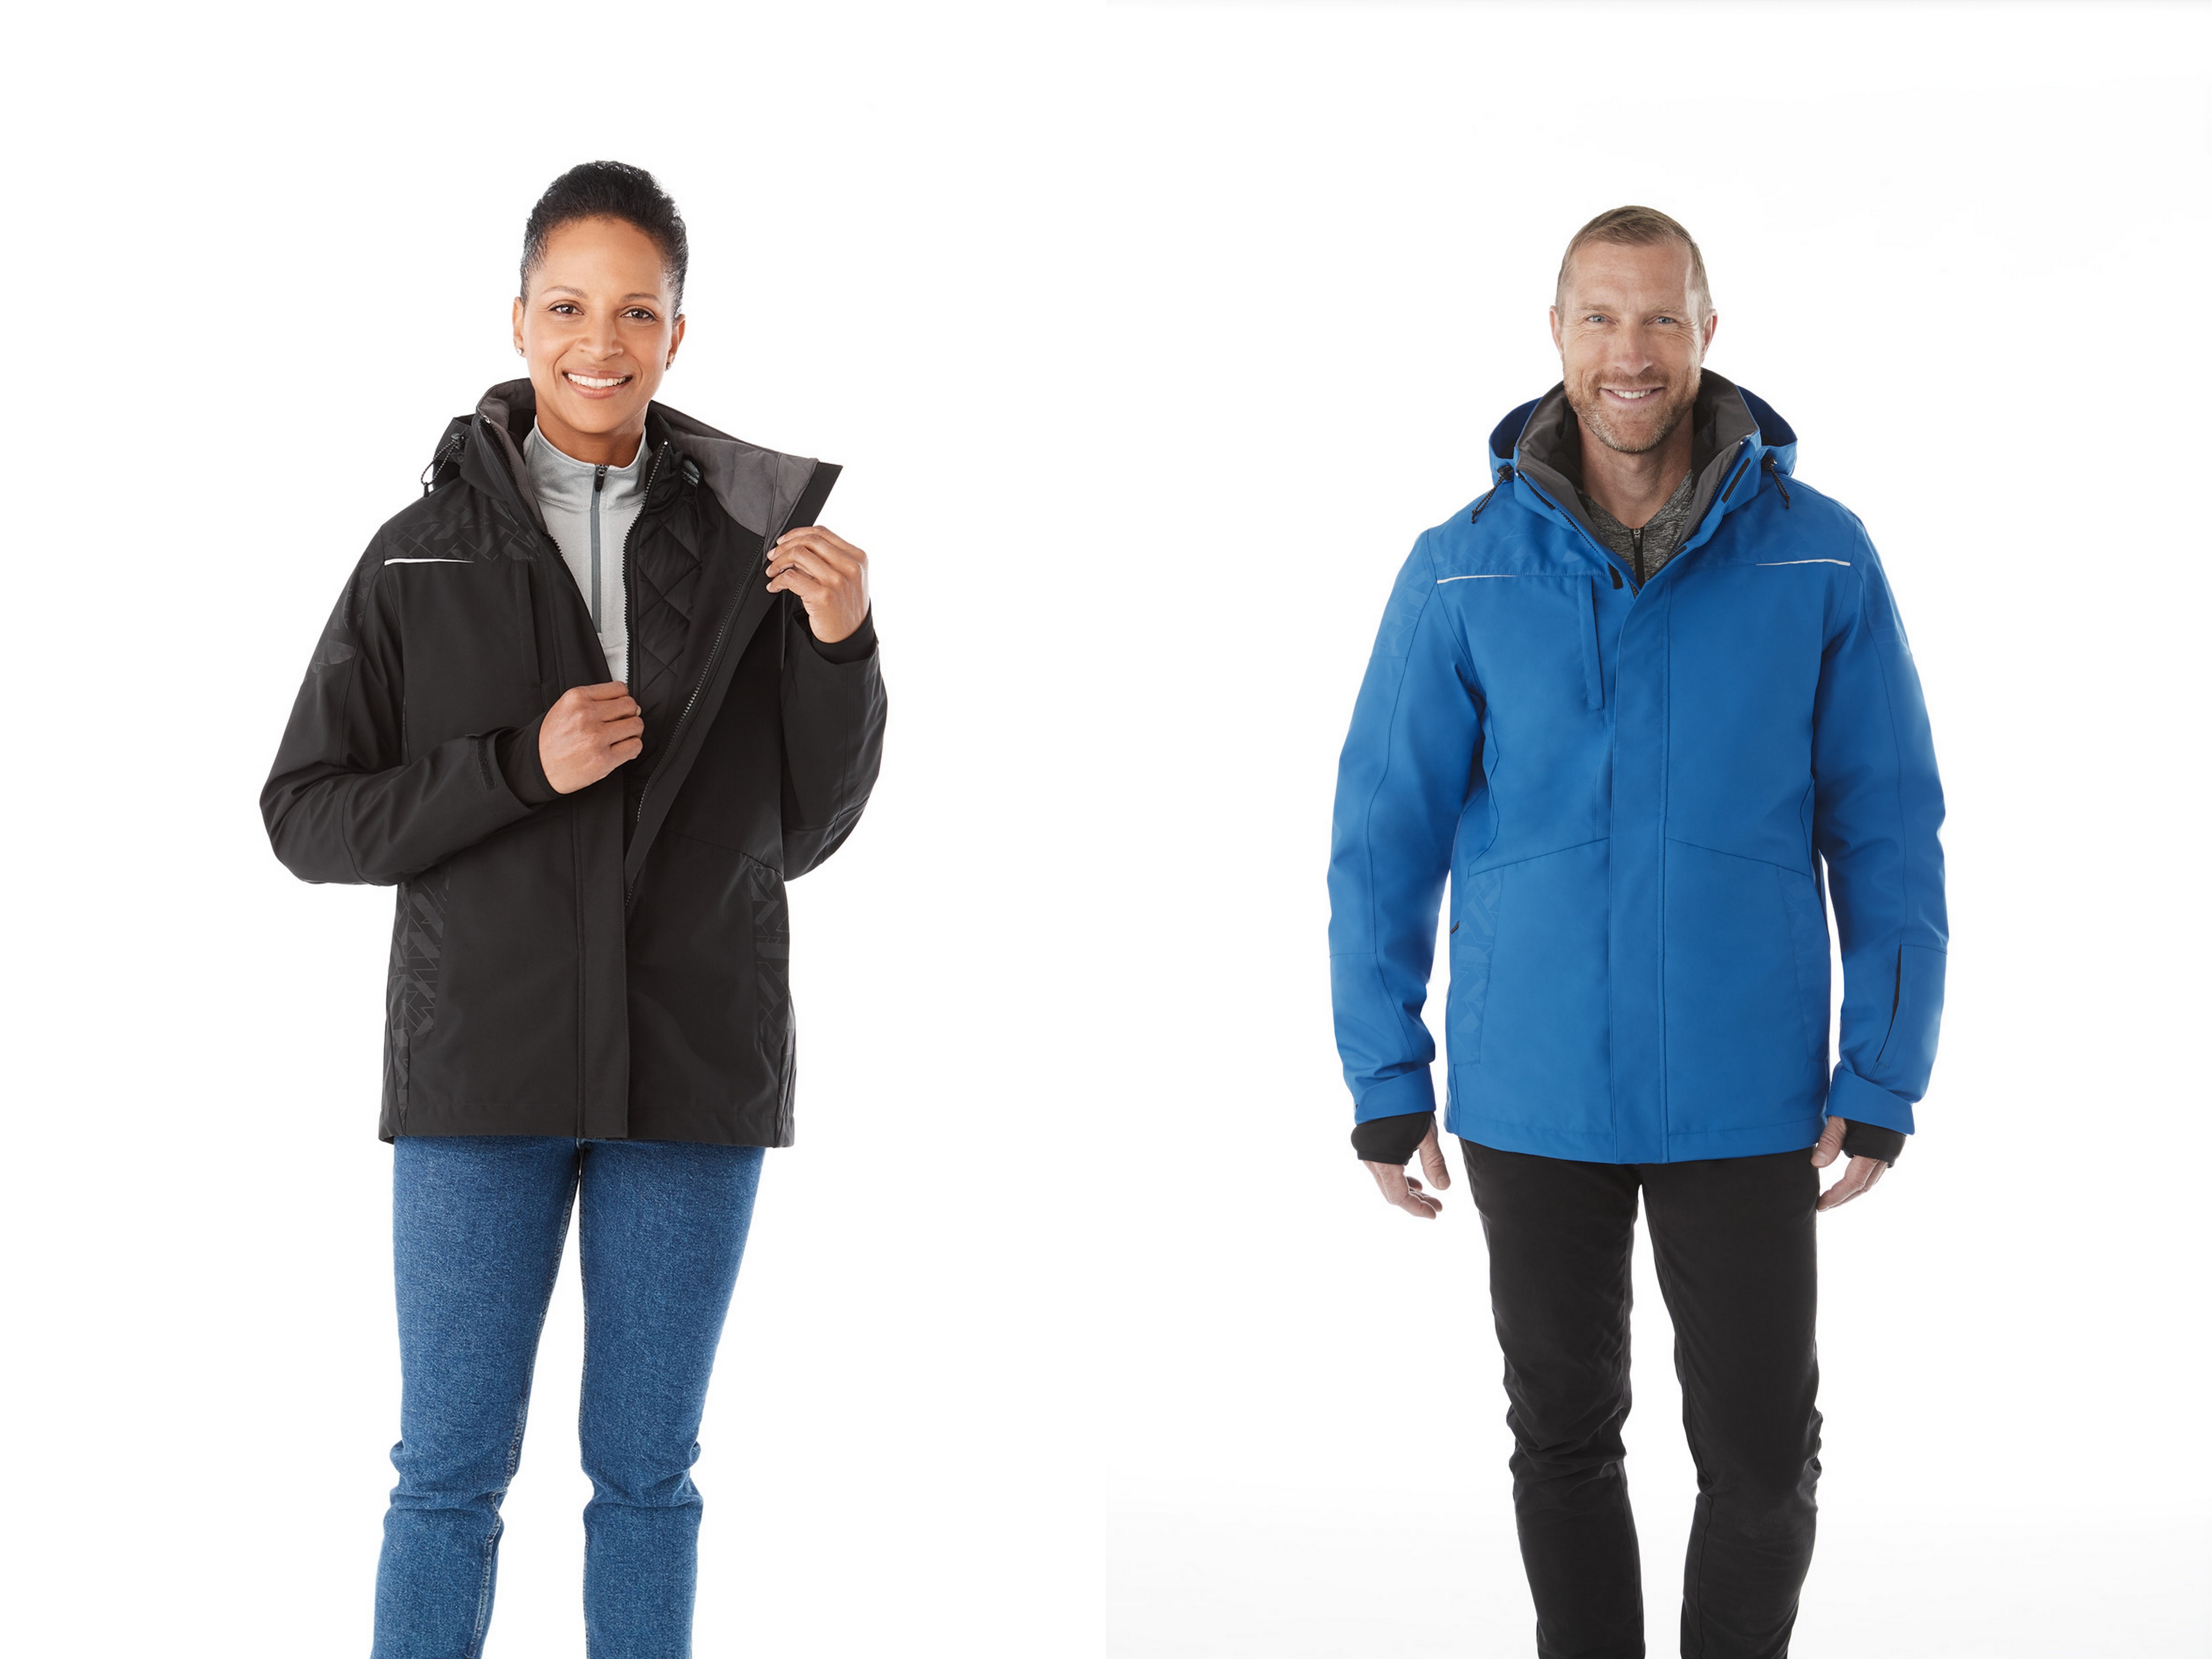 Elevate 3 in 1 Jacket for Men and Women from NYFifth